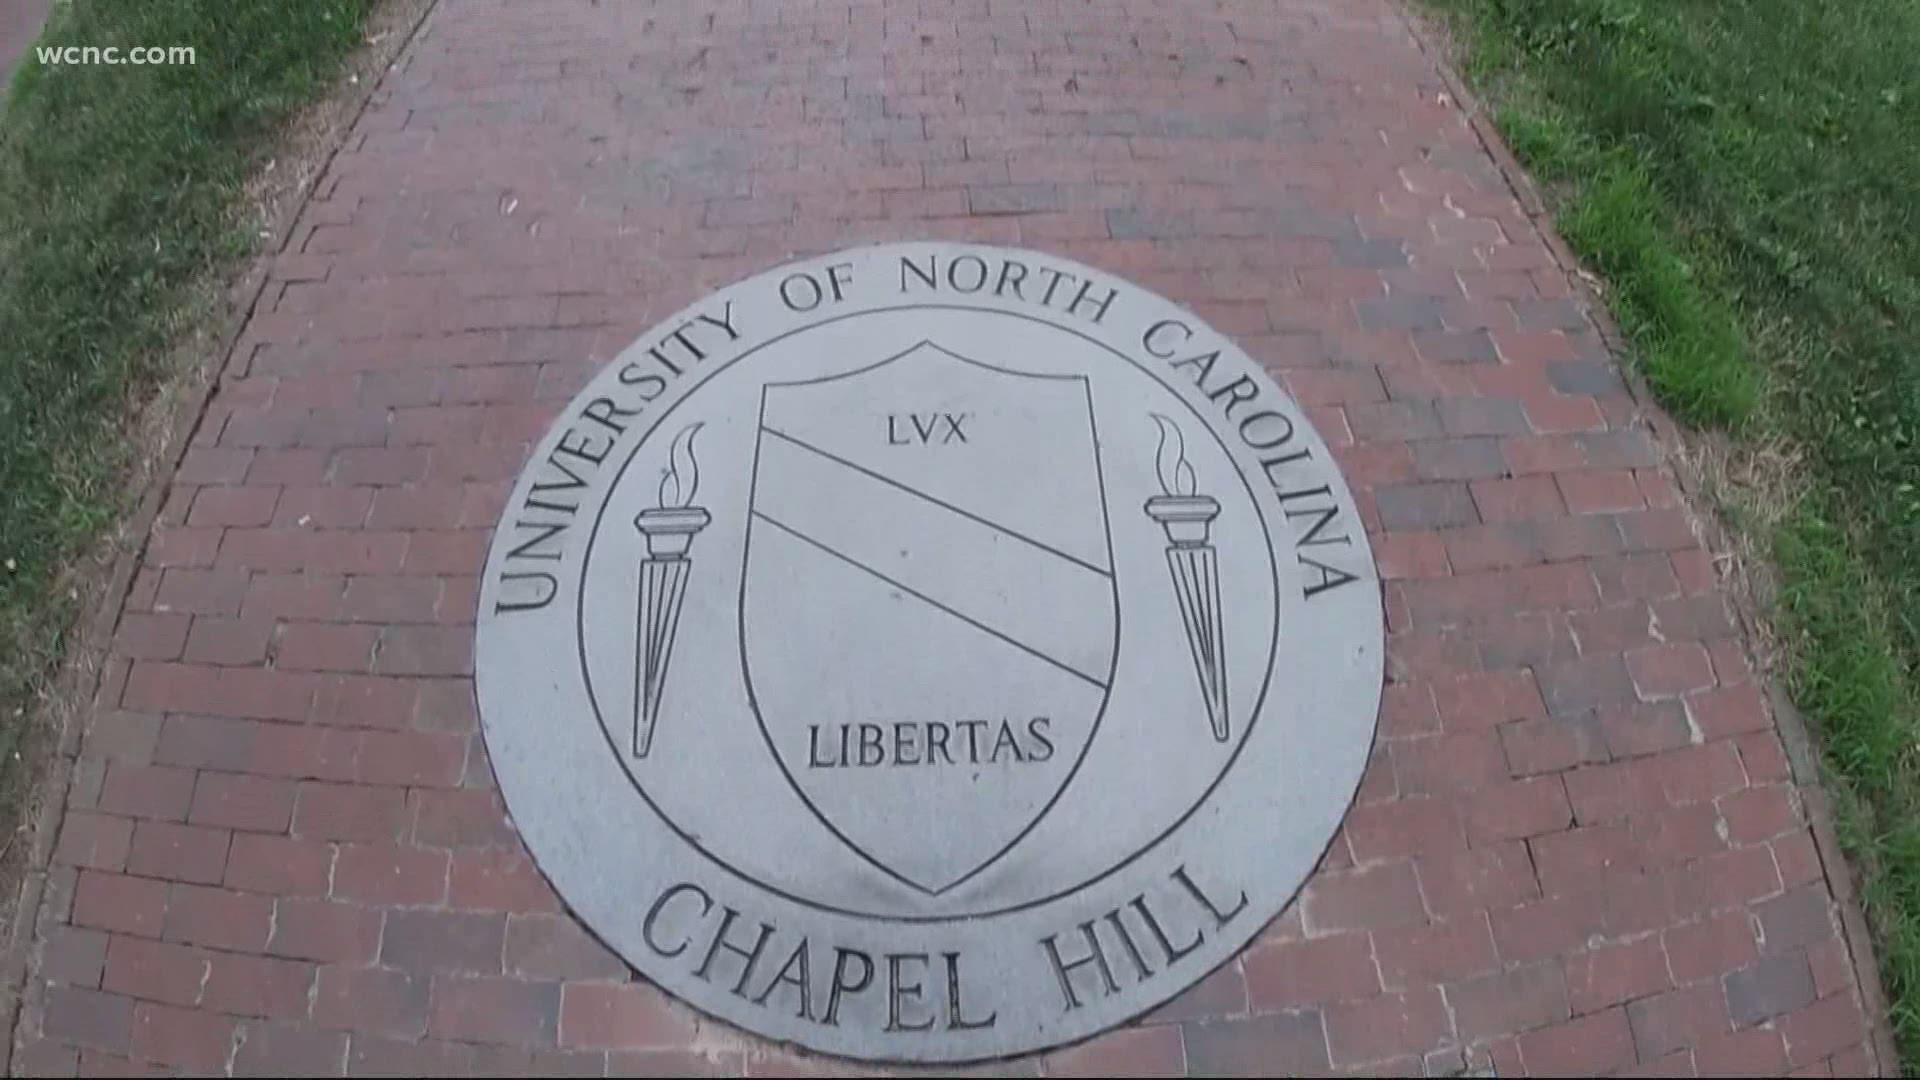 UNC-Chapel Hill and UNC State are going completely virtual.